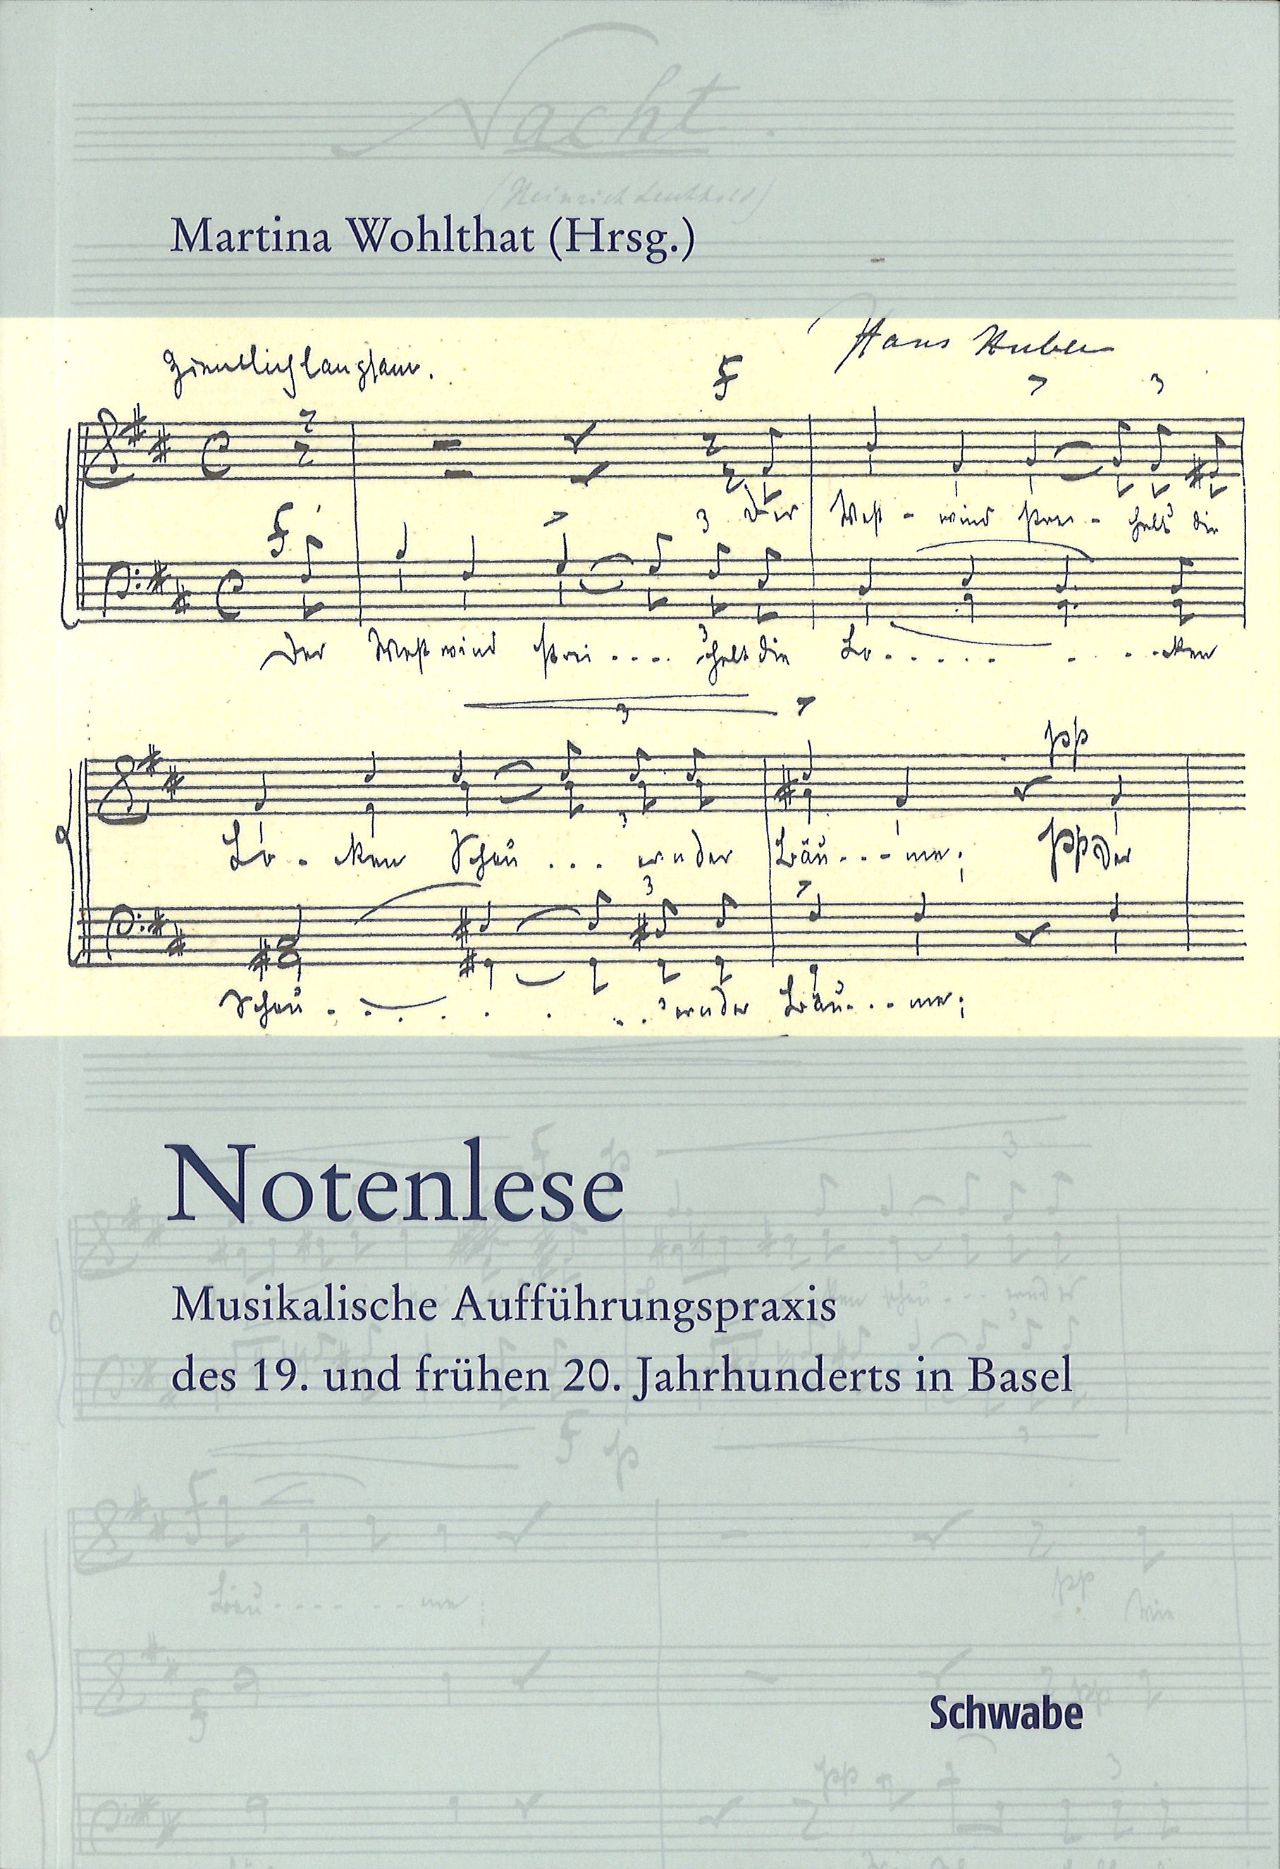 Cover of the publication "Notenlese"